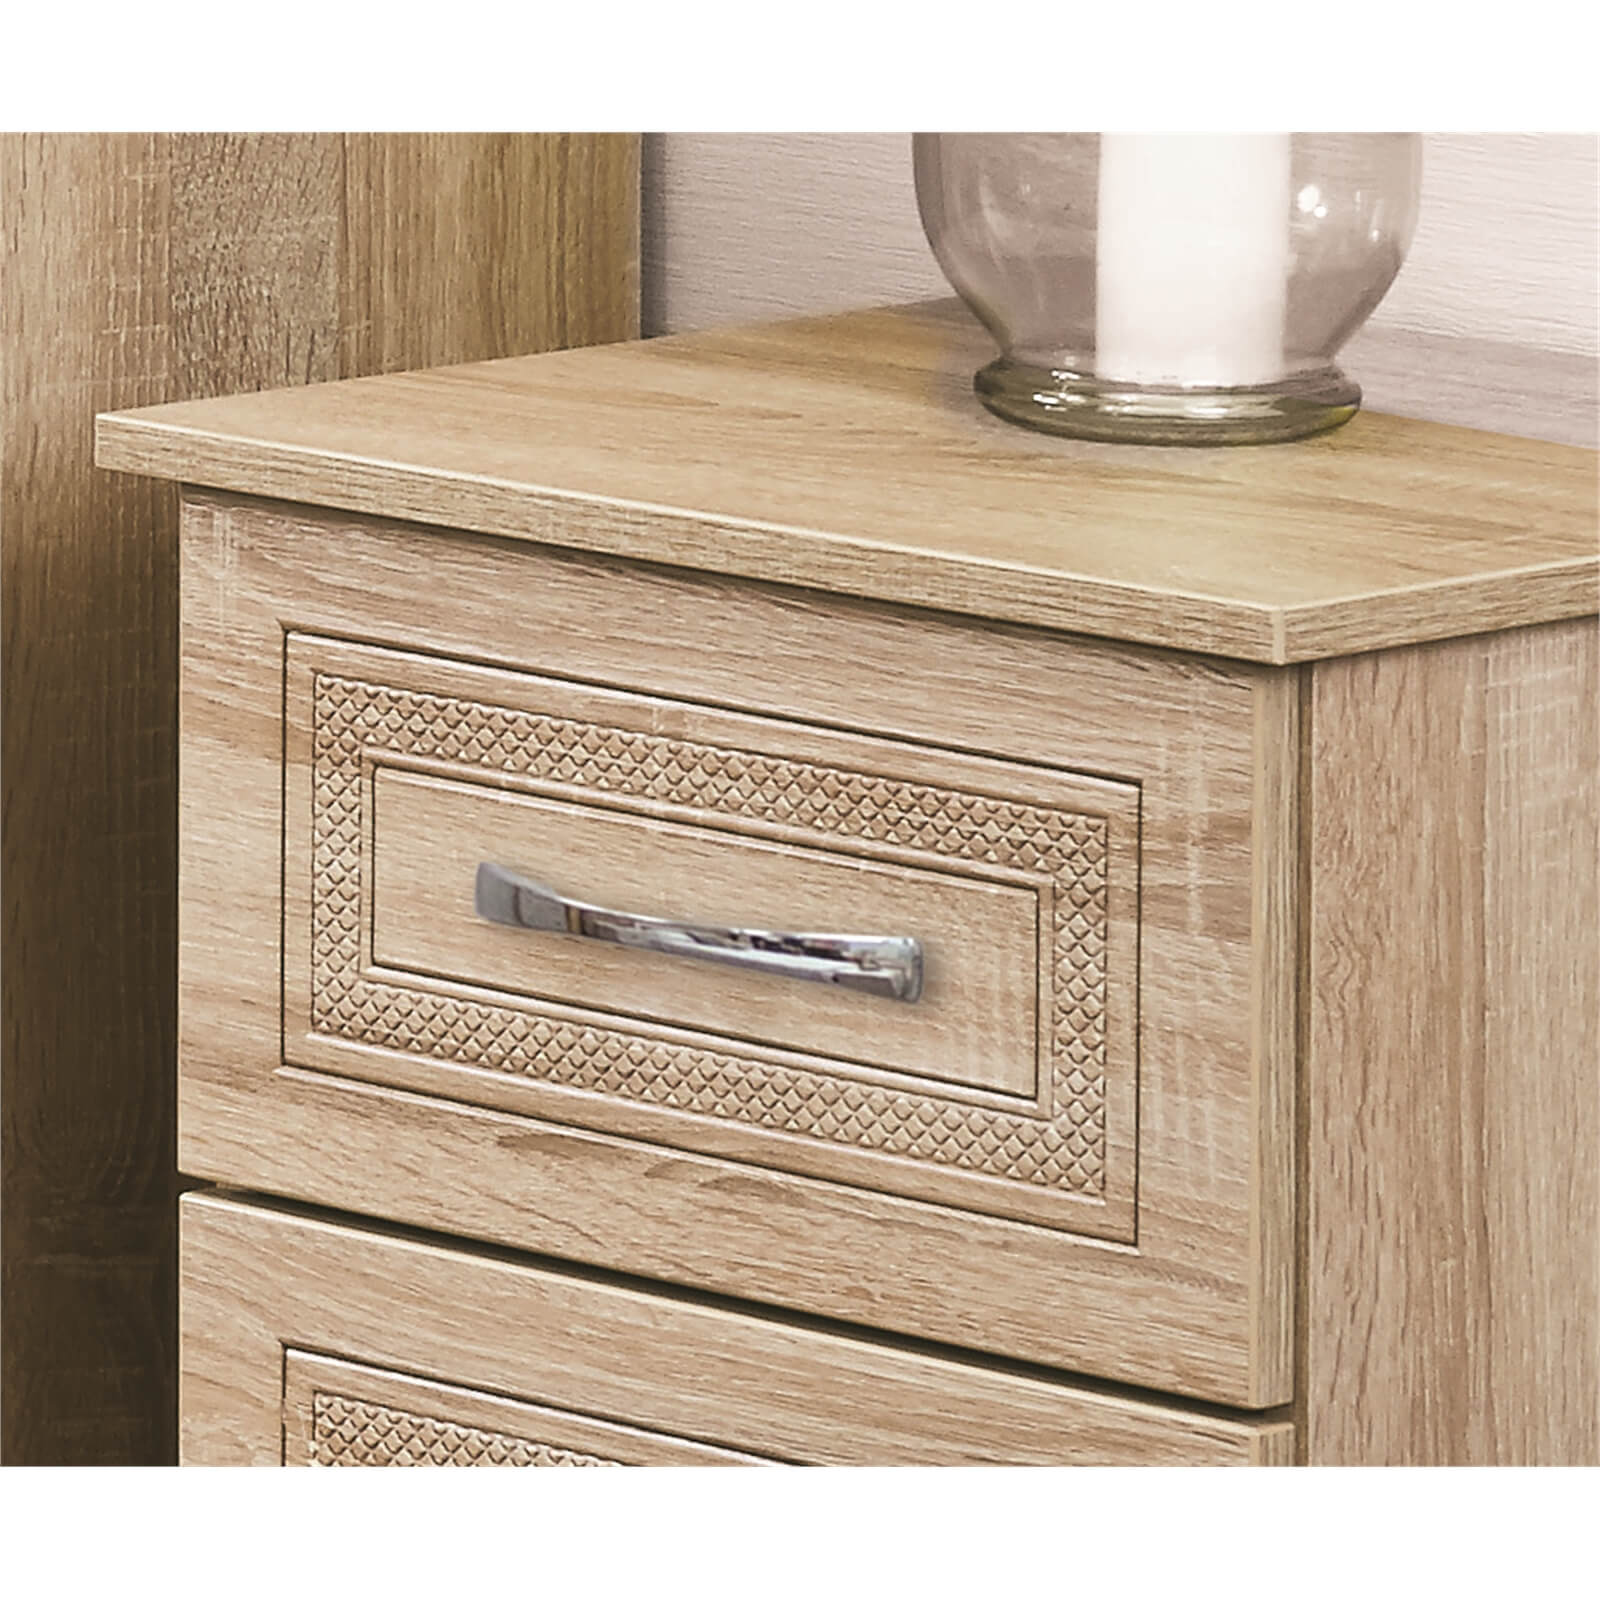 Milton 3 Drawer Bedside Table with Wireless Charging - Oak